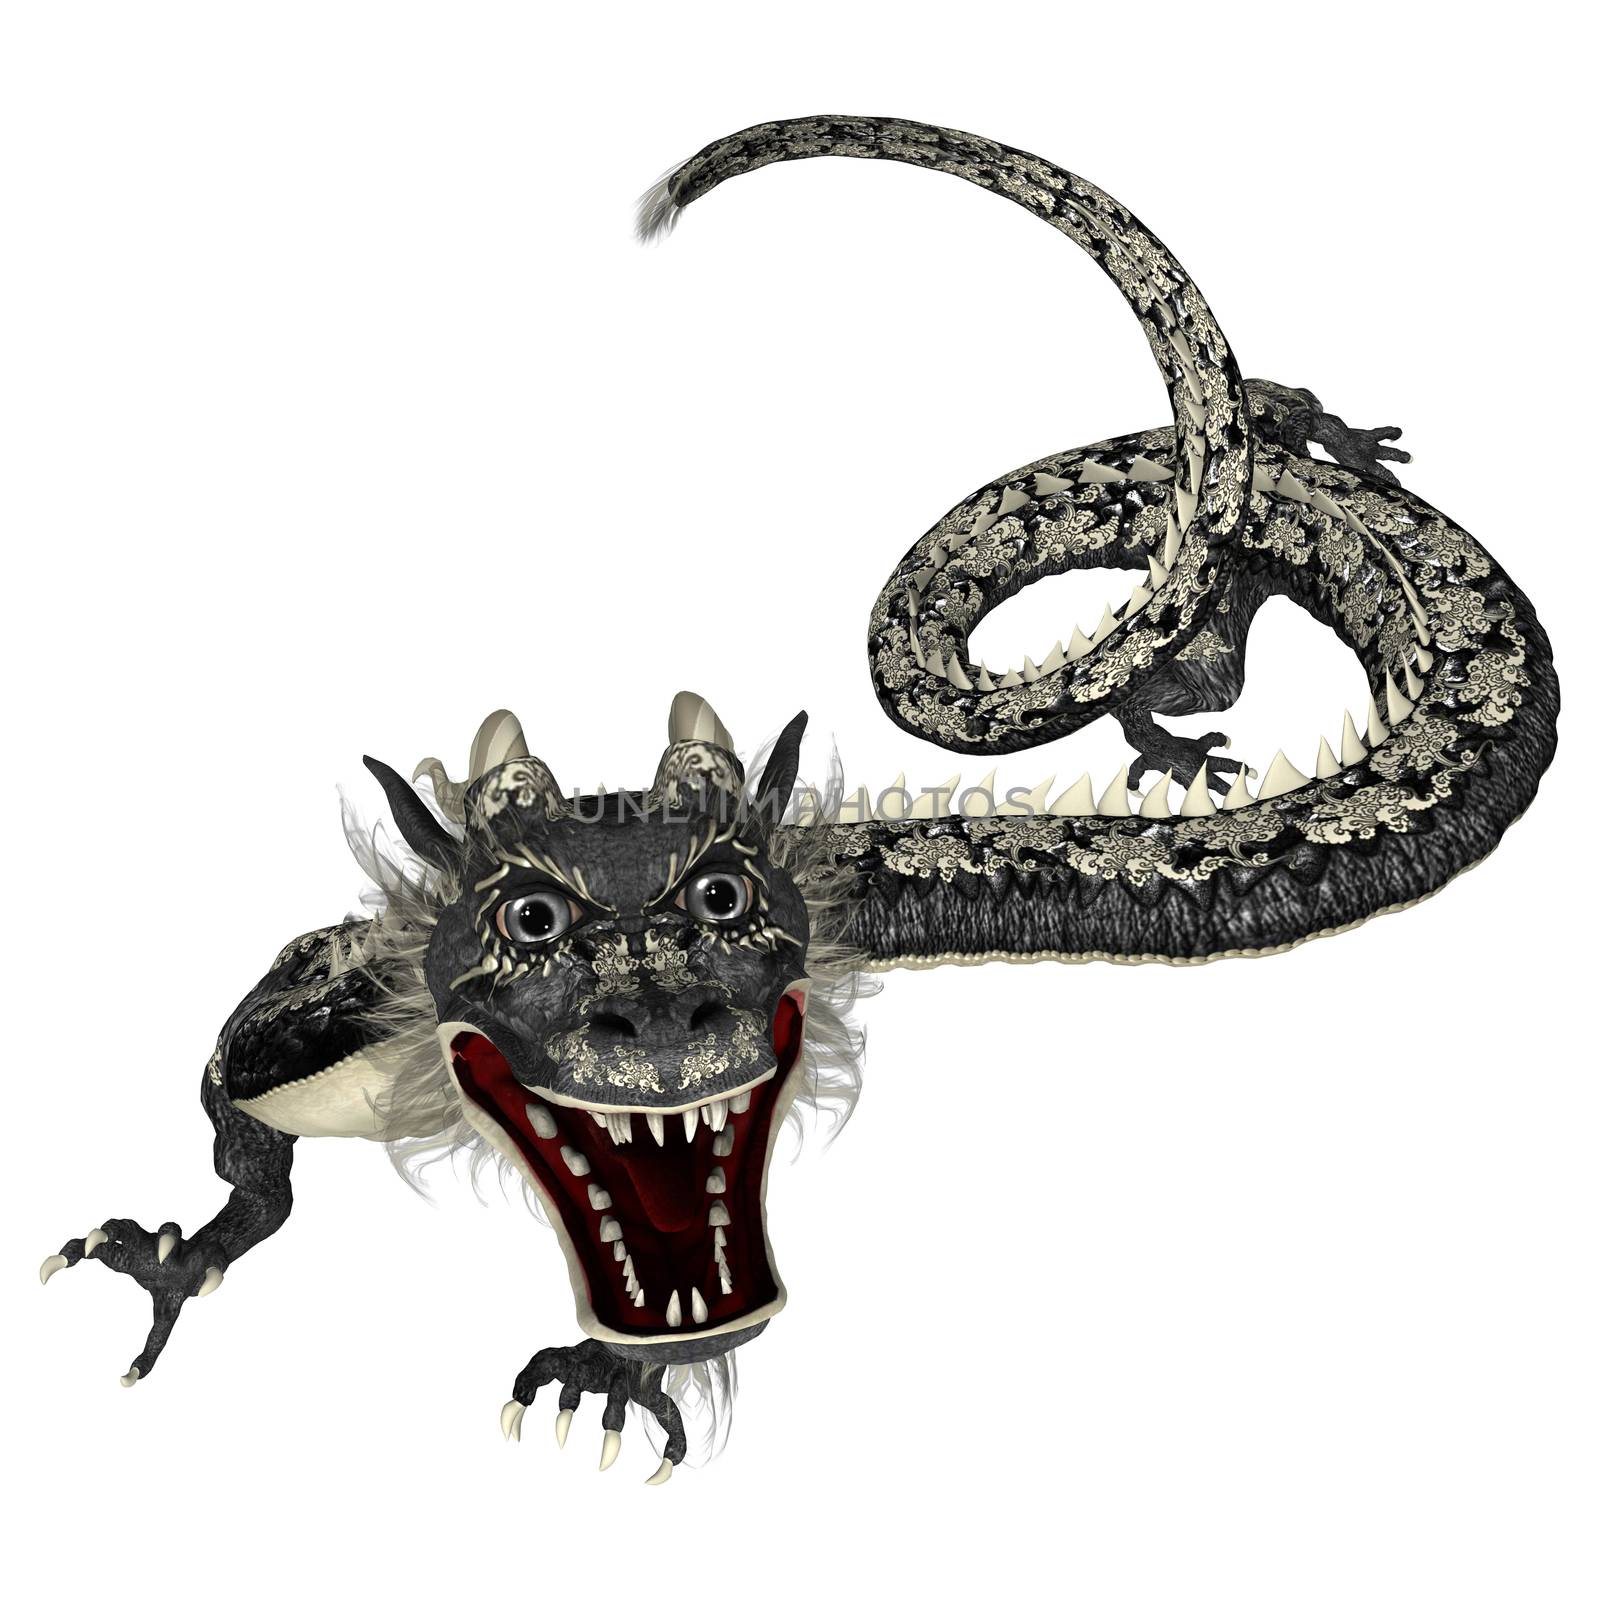 3D digital render of a black Eastern dragon isolated on white background